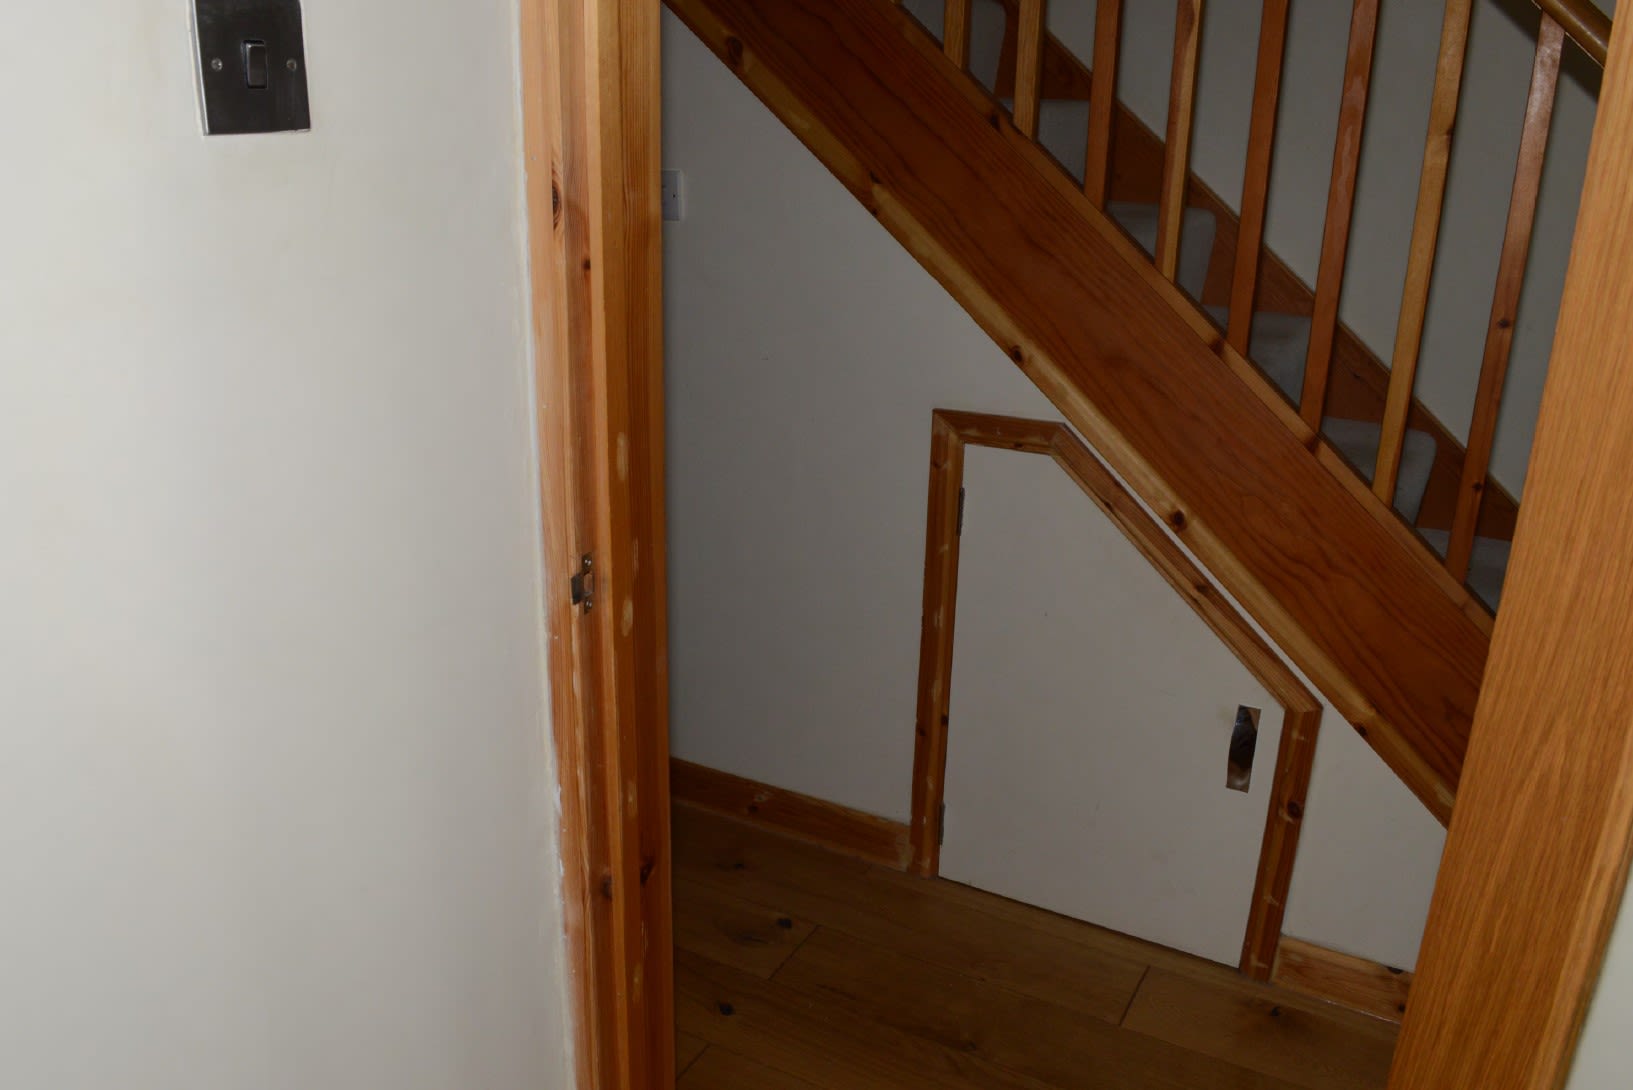 An image of a staircase and a small wooden cupboard benath it